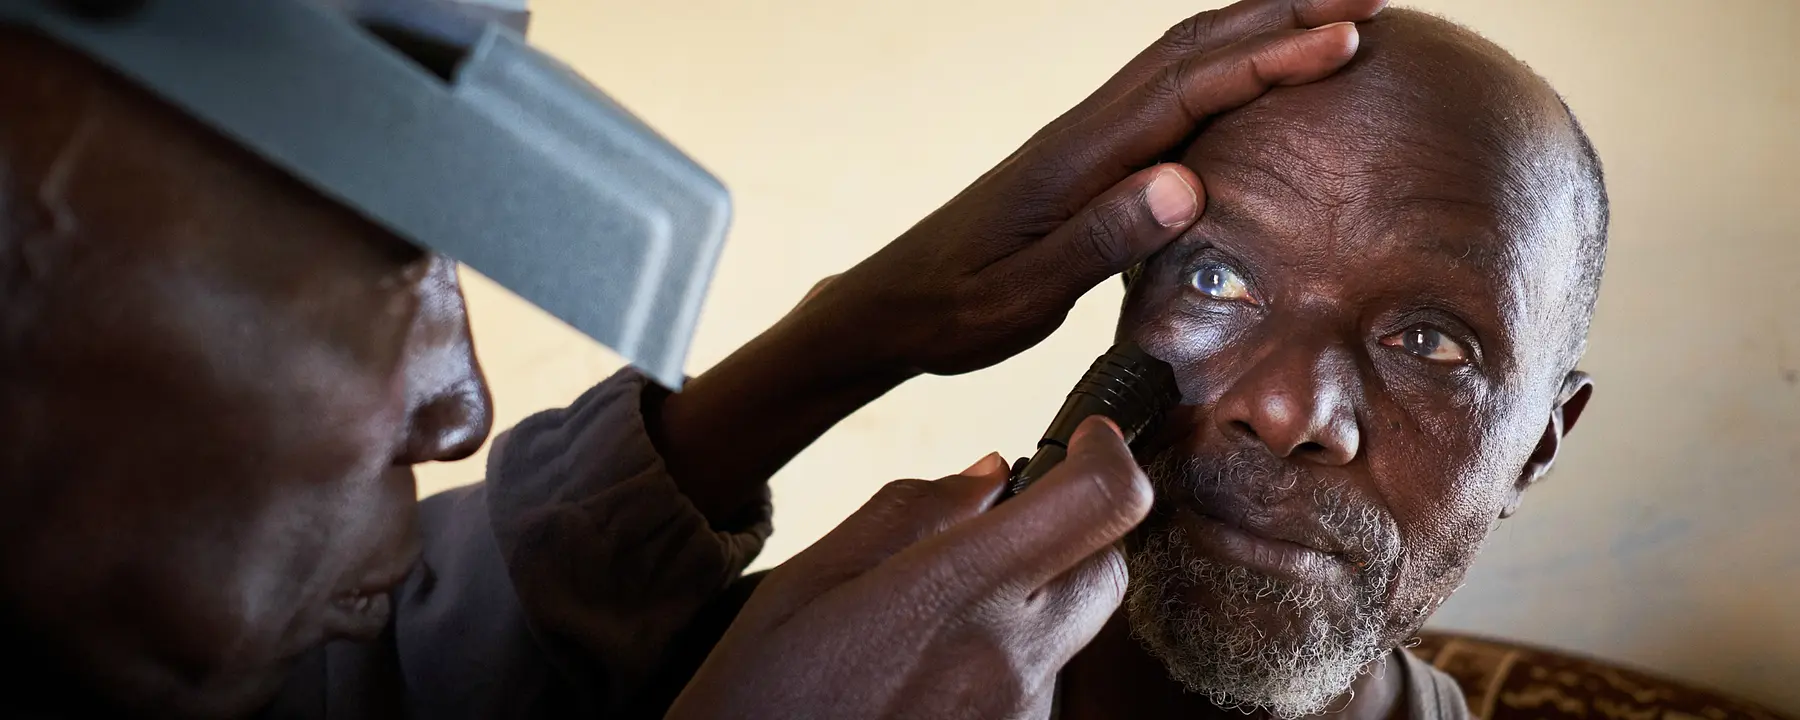 A health worker checks a man's eyes for signs of trachoma.